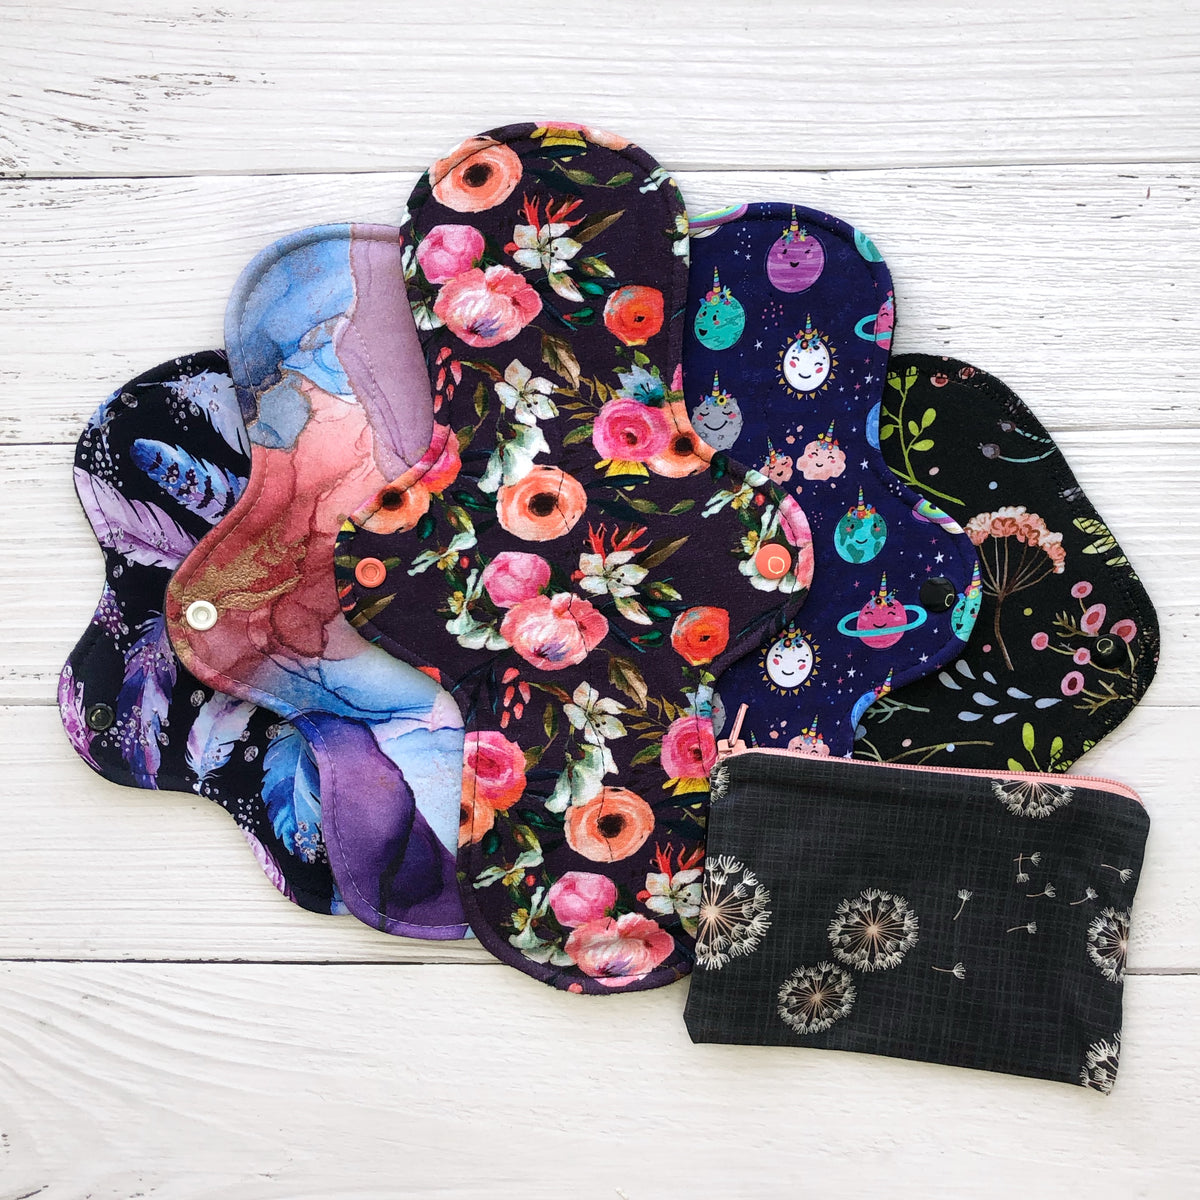 basic reusable pad starter set with 5 colourful reusable pads in floral and other prints and a dandelion print small wetbag